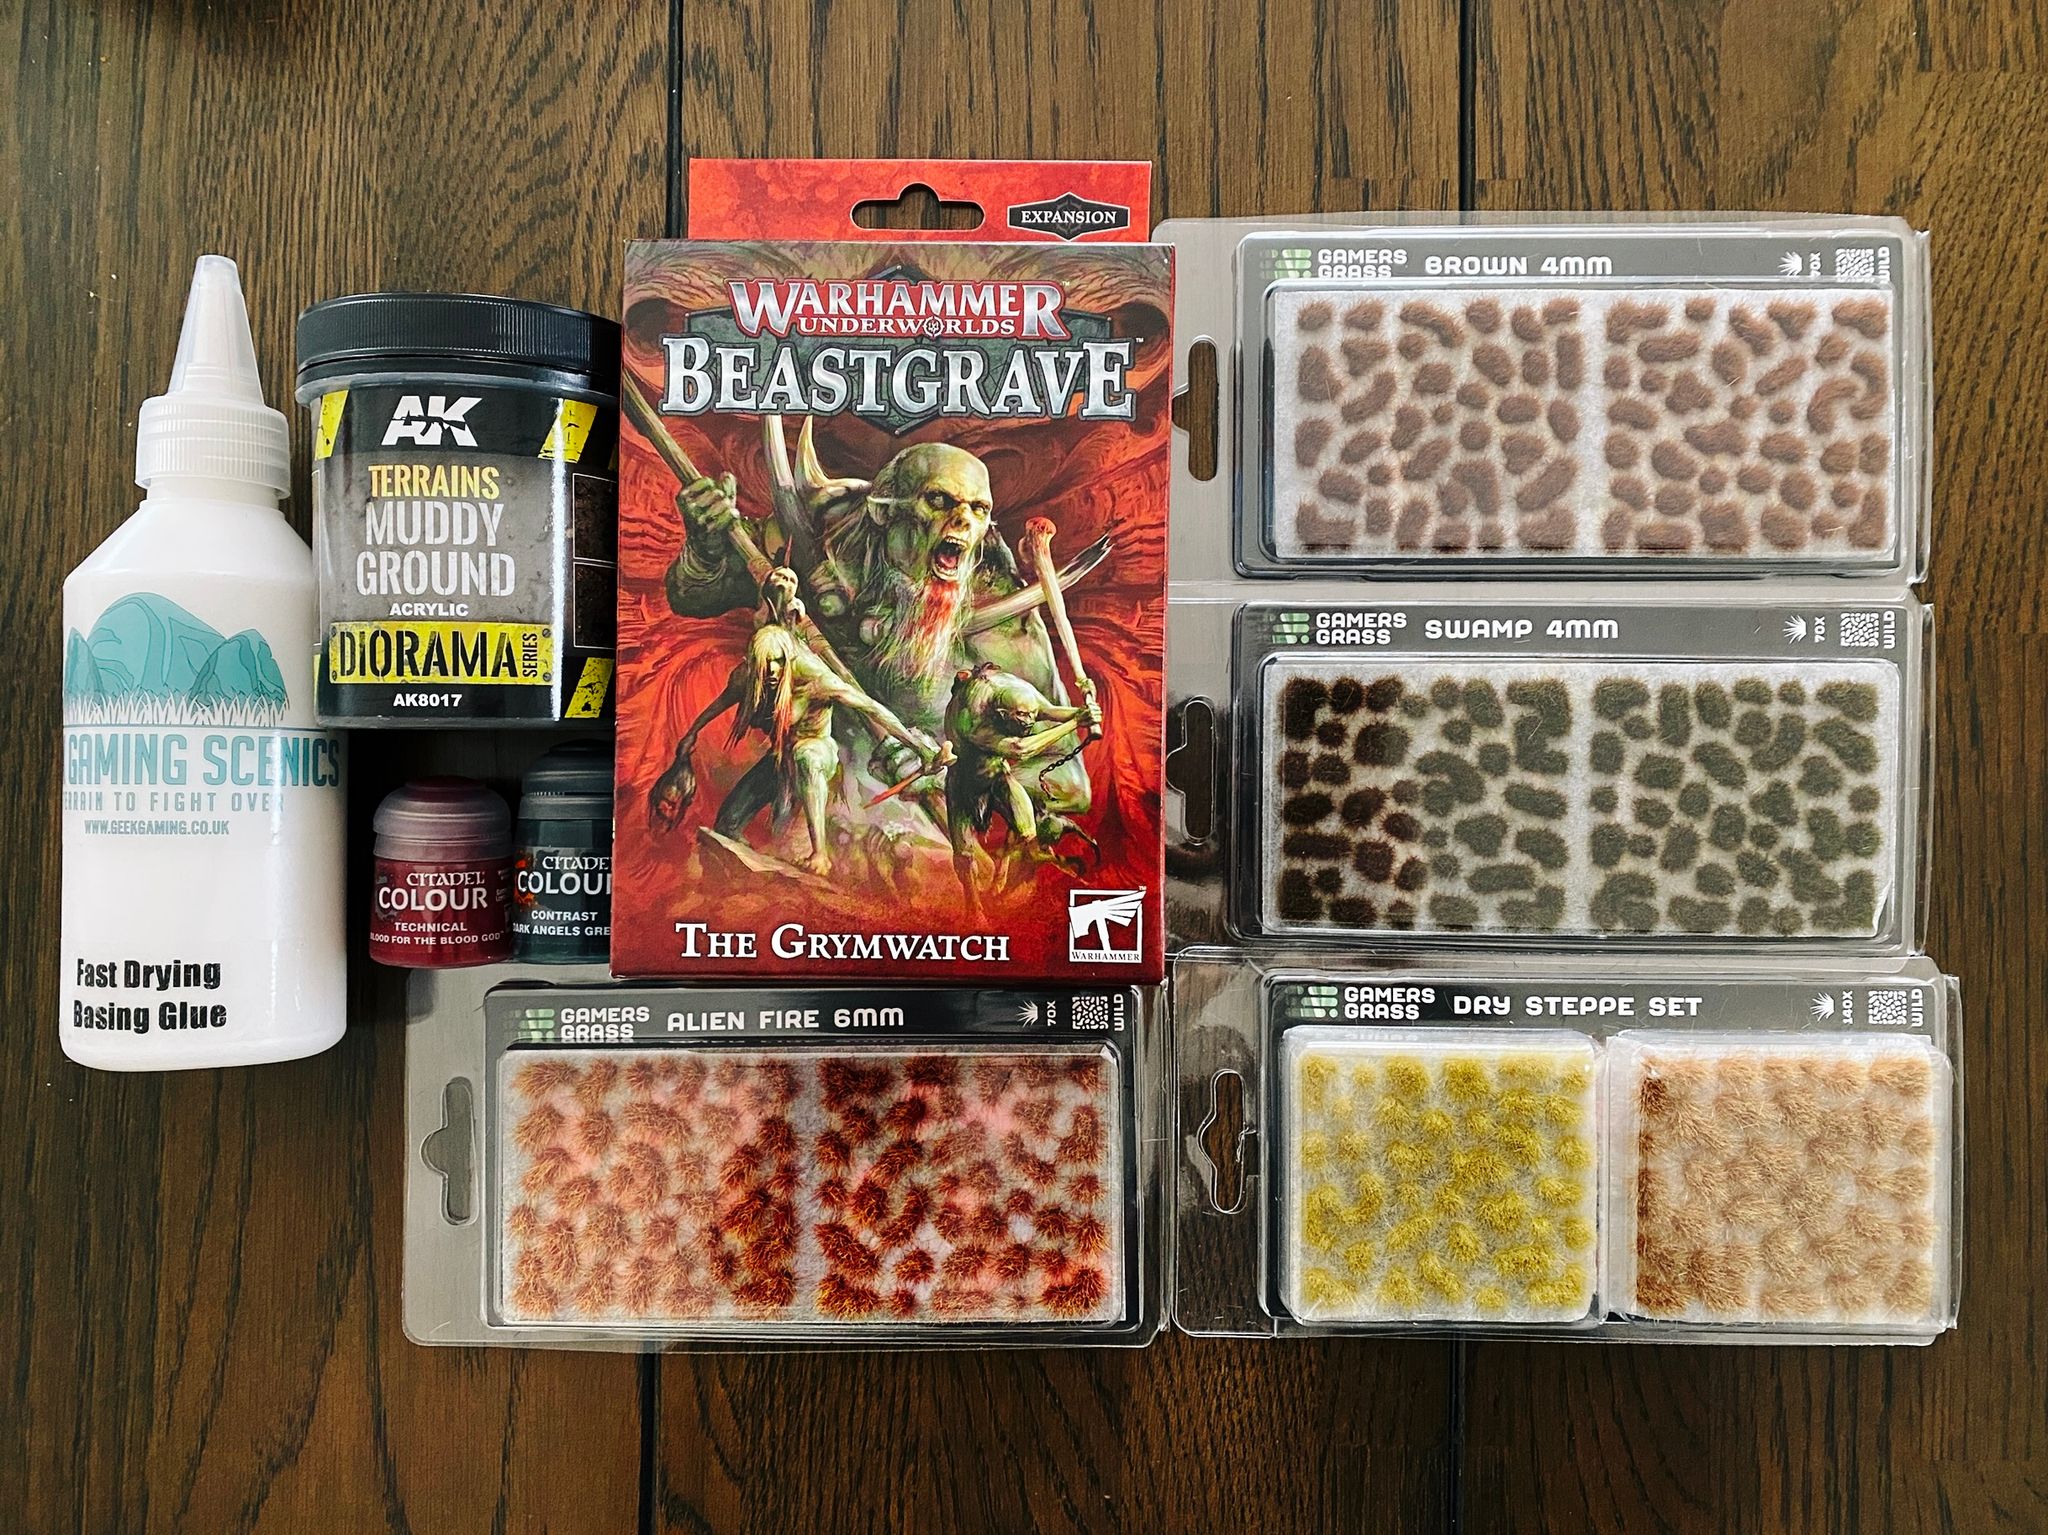 A photo of the box of the Warhammer Underworlds warband "The Grymwatch", which are essentially zombies. Also a bunch of little different coloured tufts of grass that are designed to stick onto a miniature's base and add visual interest, and a tub of "muddy ground" brown texture paint, also for basing.